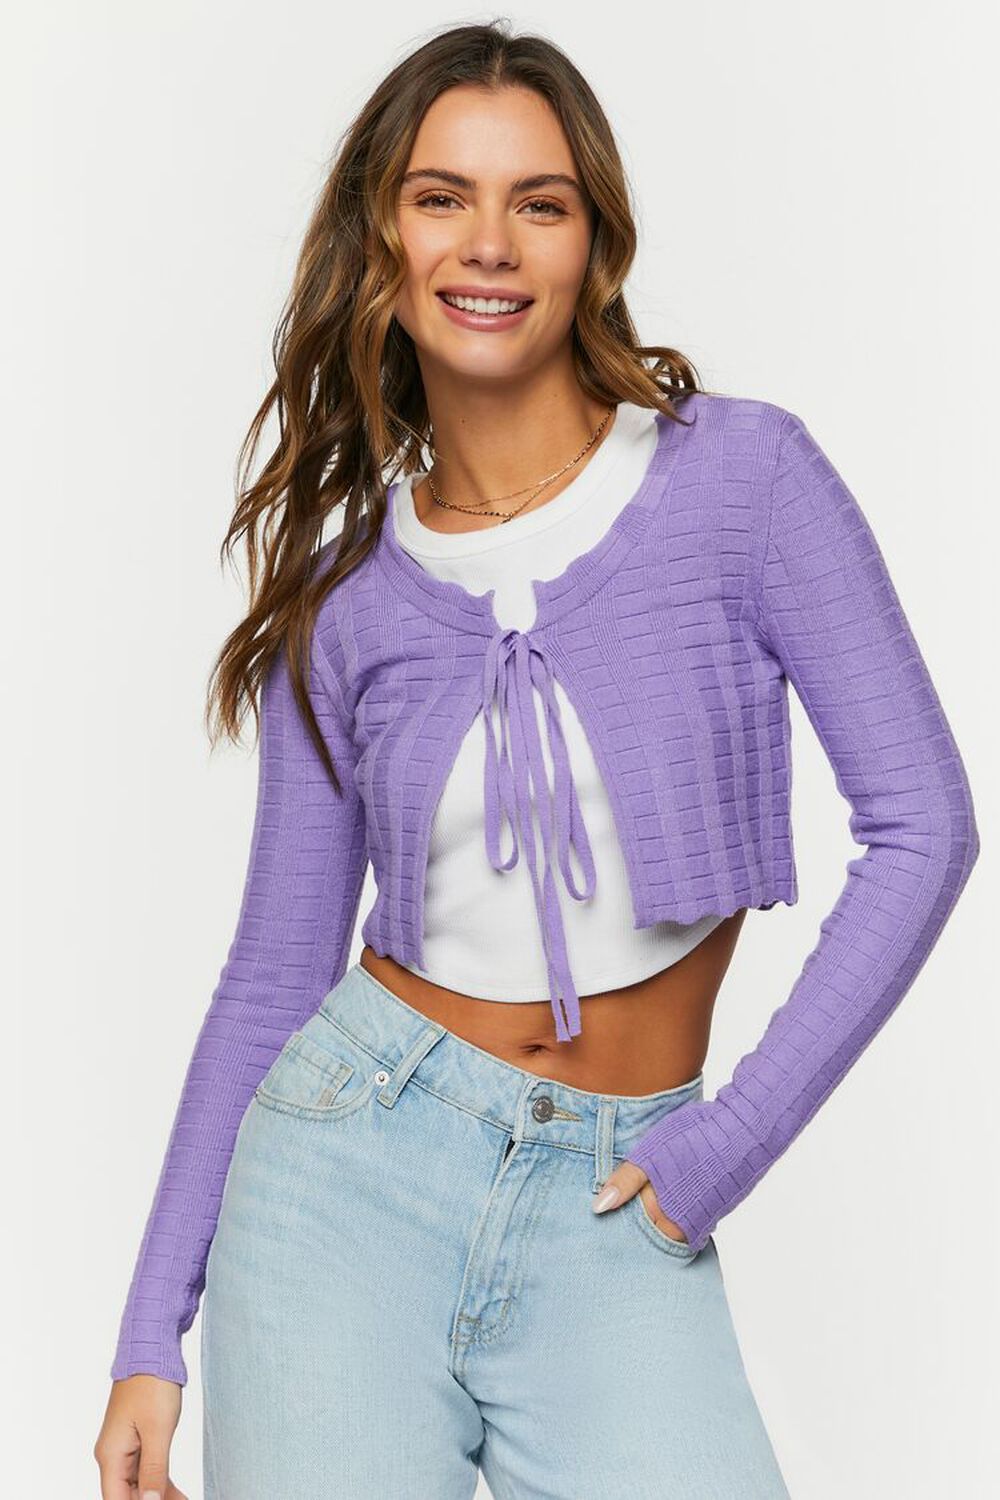 LAVENDER Tie-Front Cropped Cardigan Sweater, image 1